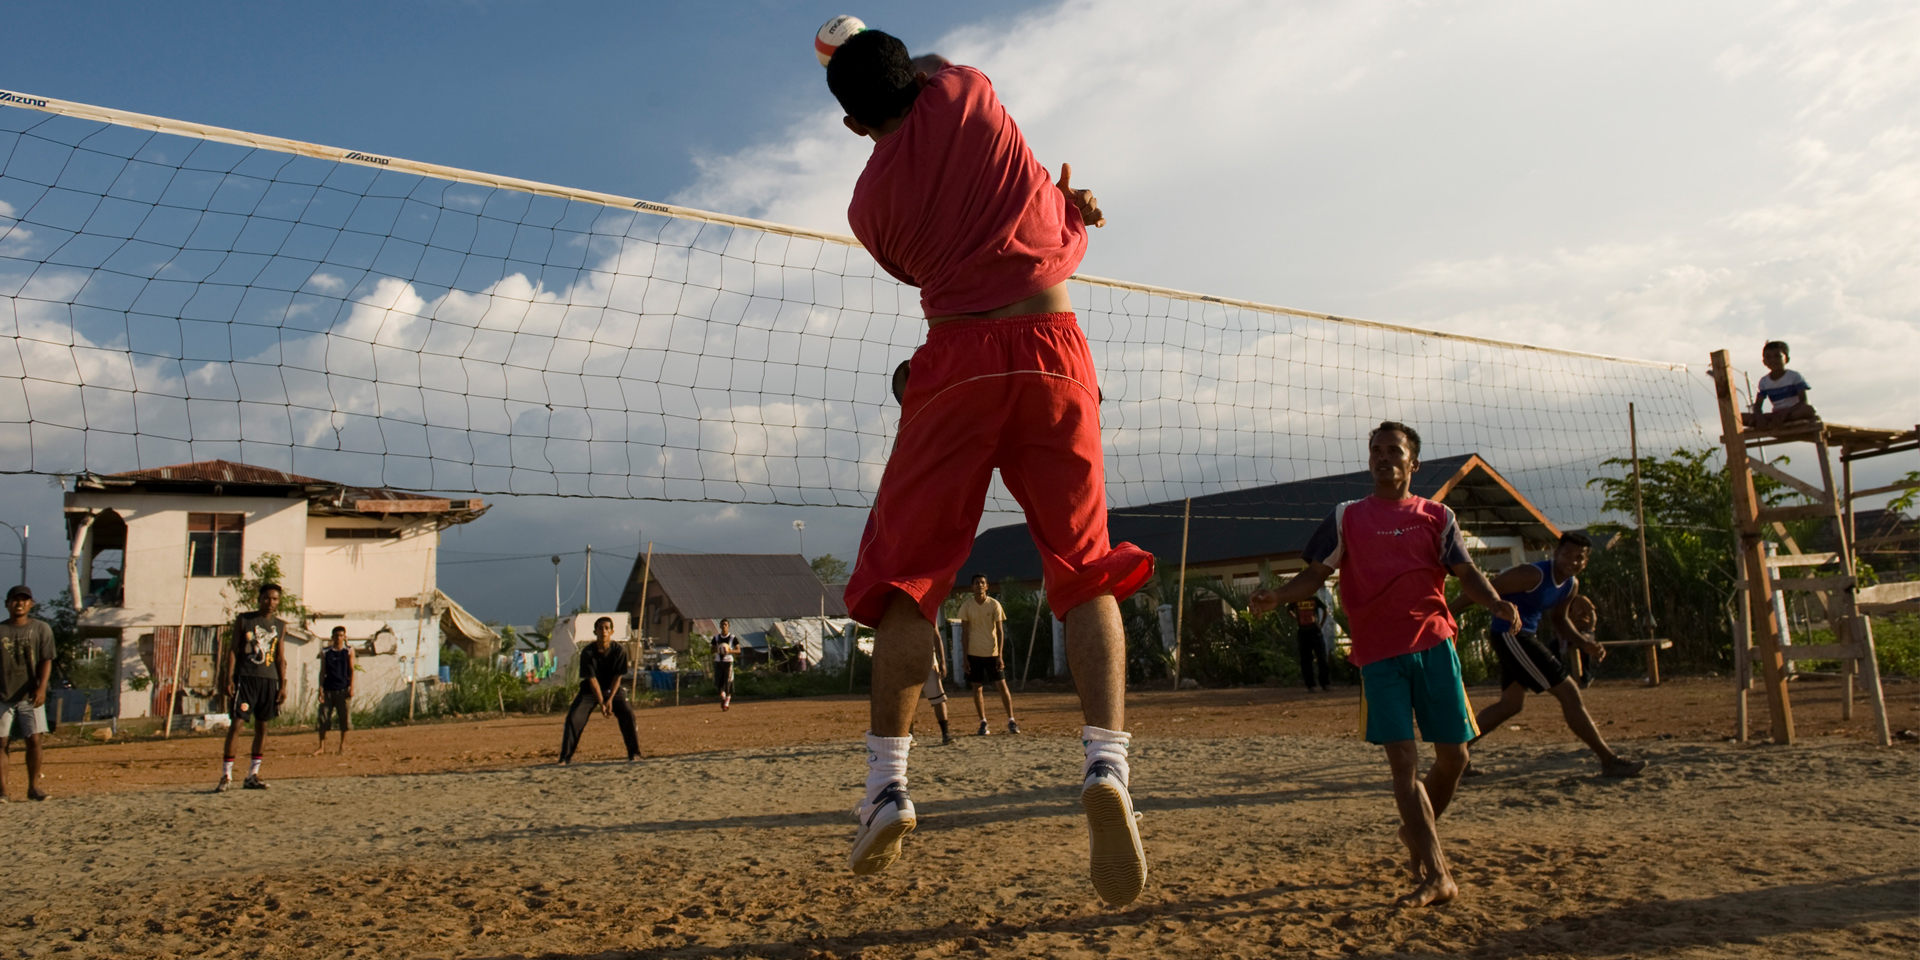 Image of several people playing volleyball as a small child sits and watches from the sidelines.